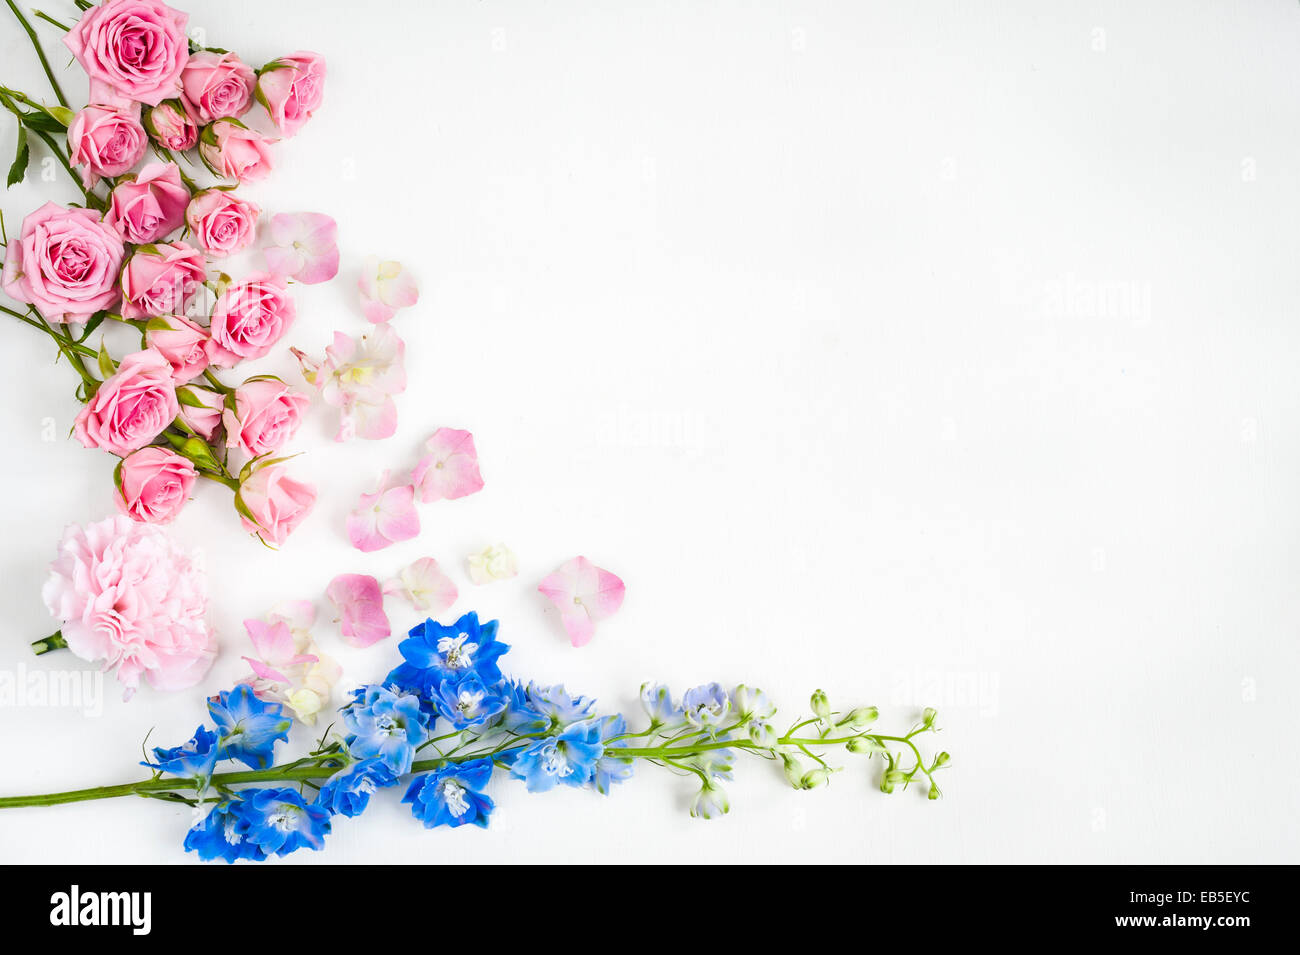 blue delphinium and pink roses, carnation and hydrangea on white backdrop Stock Photo